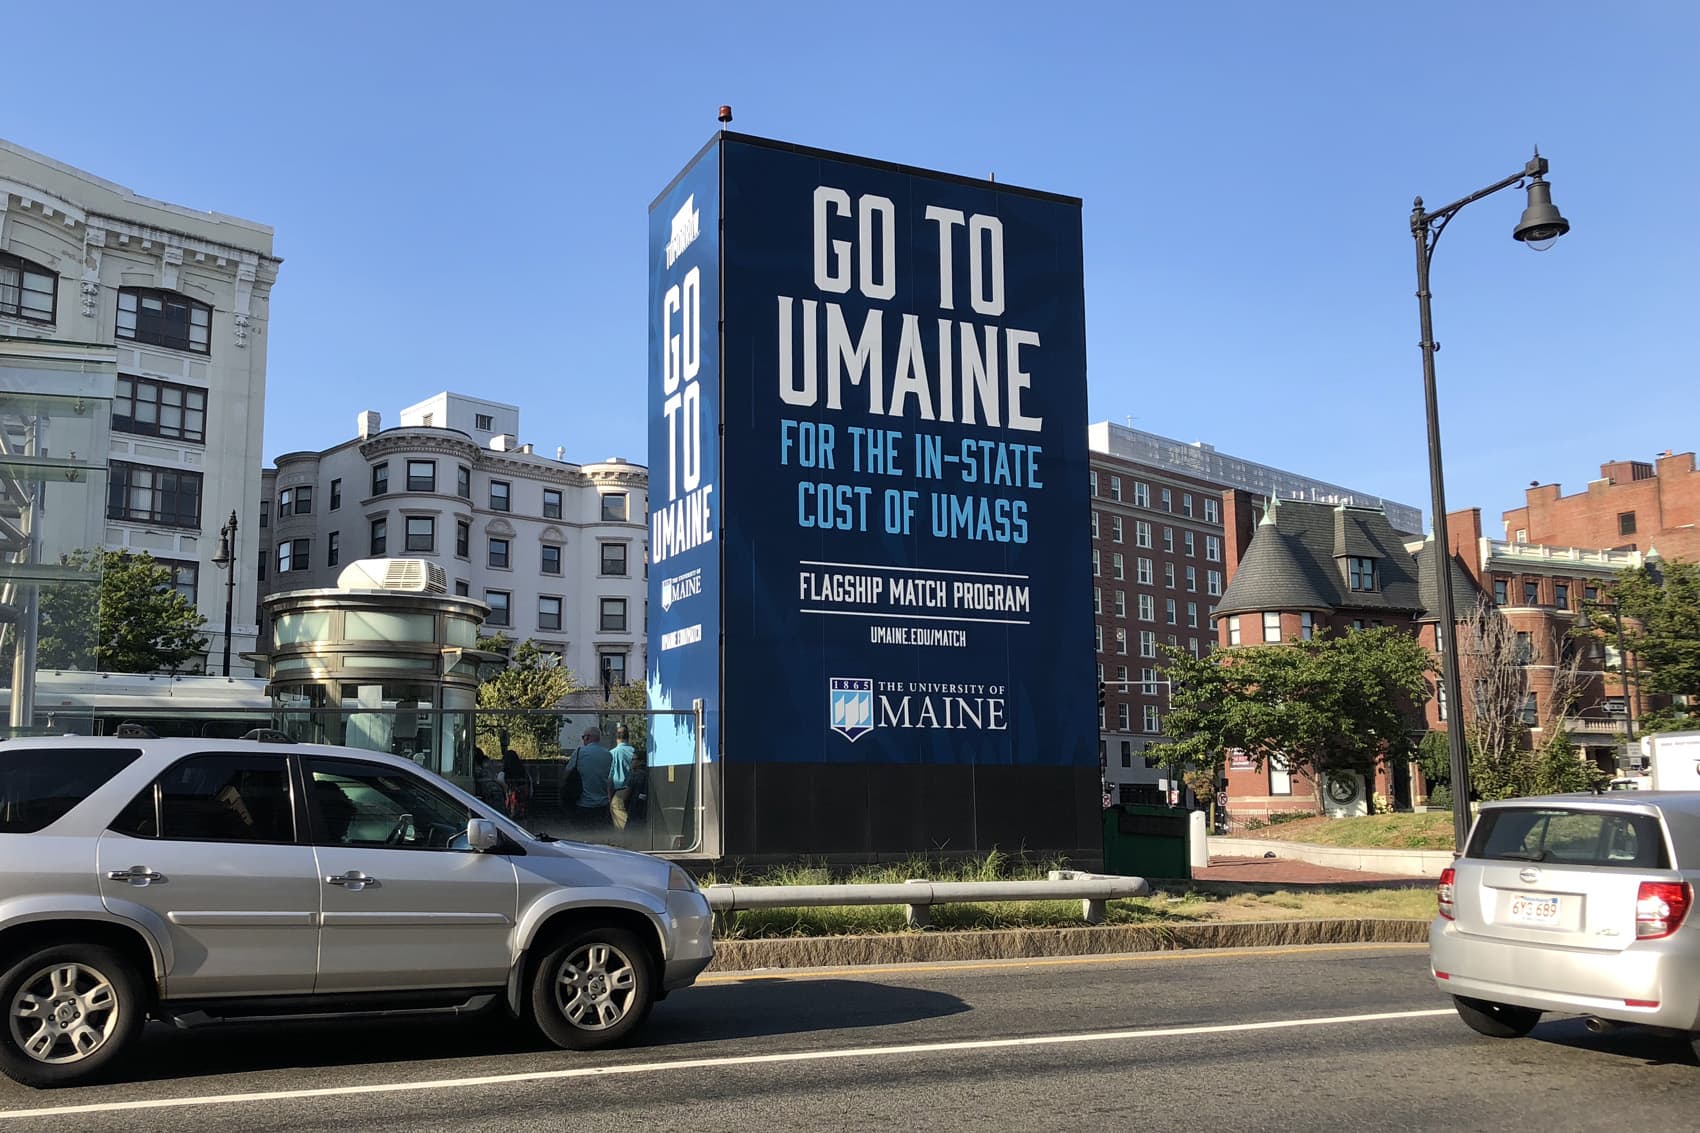 The UMaine Flagship Match Program &quot;guarantees academically qualified, first-year students from several states will pay the same tuition and fee rate as their home state’s flagship institution.&quot; (Alex Schroeder/On Point)